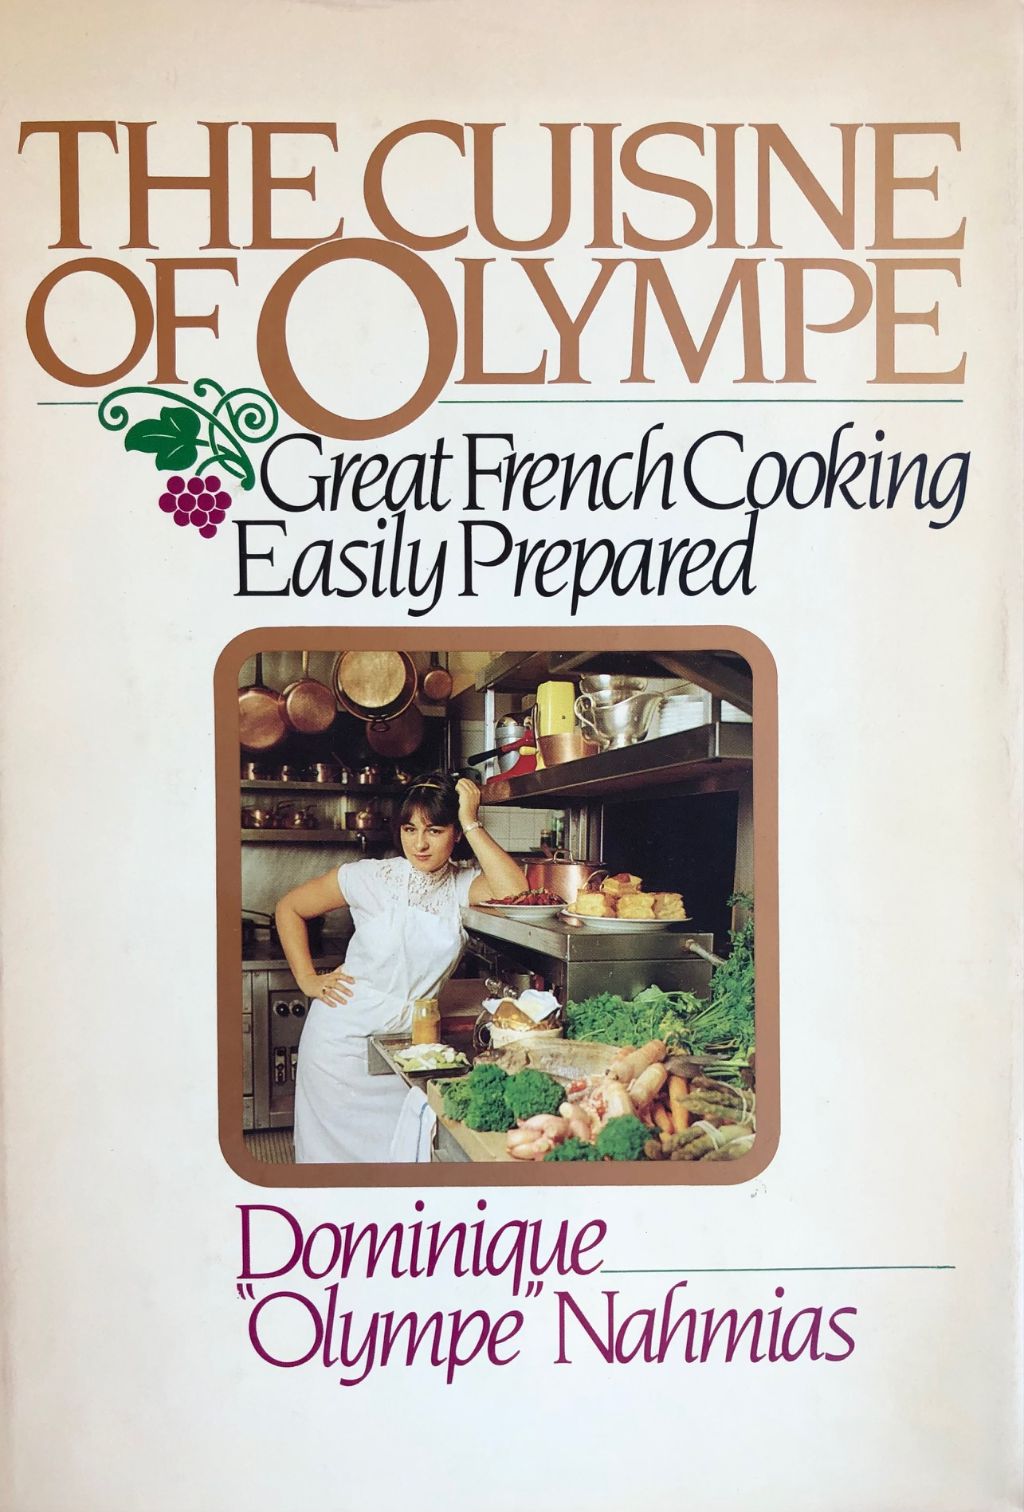 The Cuisine of Olympe: Great French Cooking Easily Prepared (Dominique "Olympe" Nahmias)